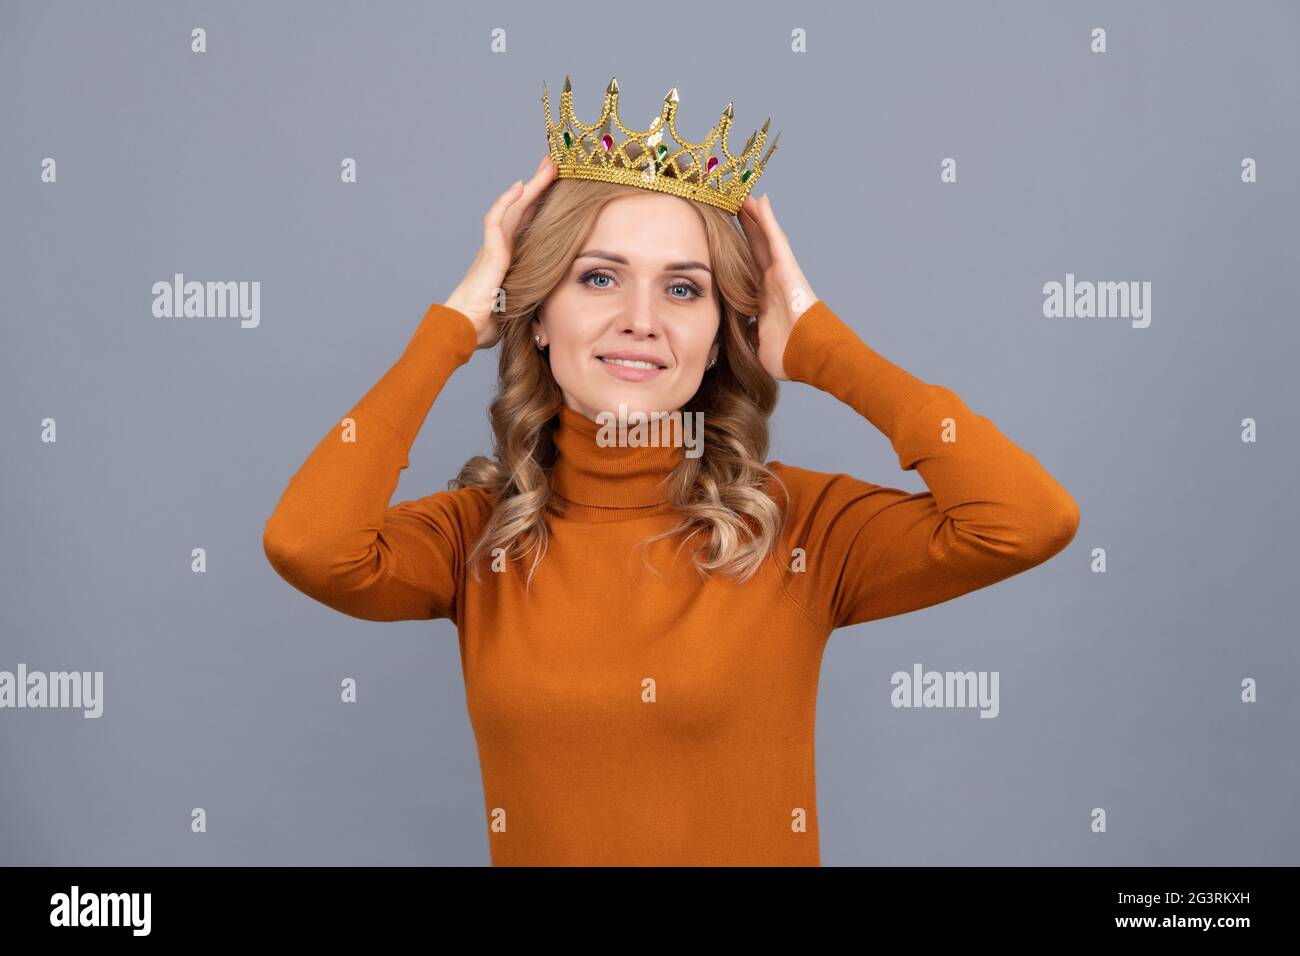 smiling blonde girl with curly hair wear crown, egoism Stock Photo